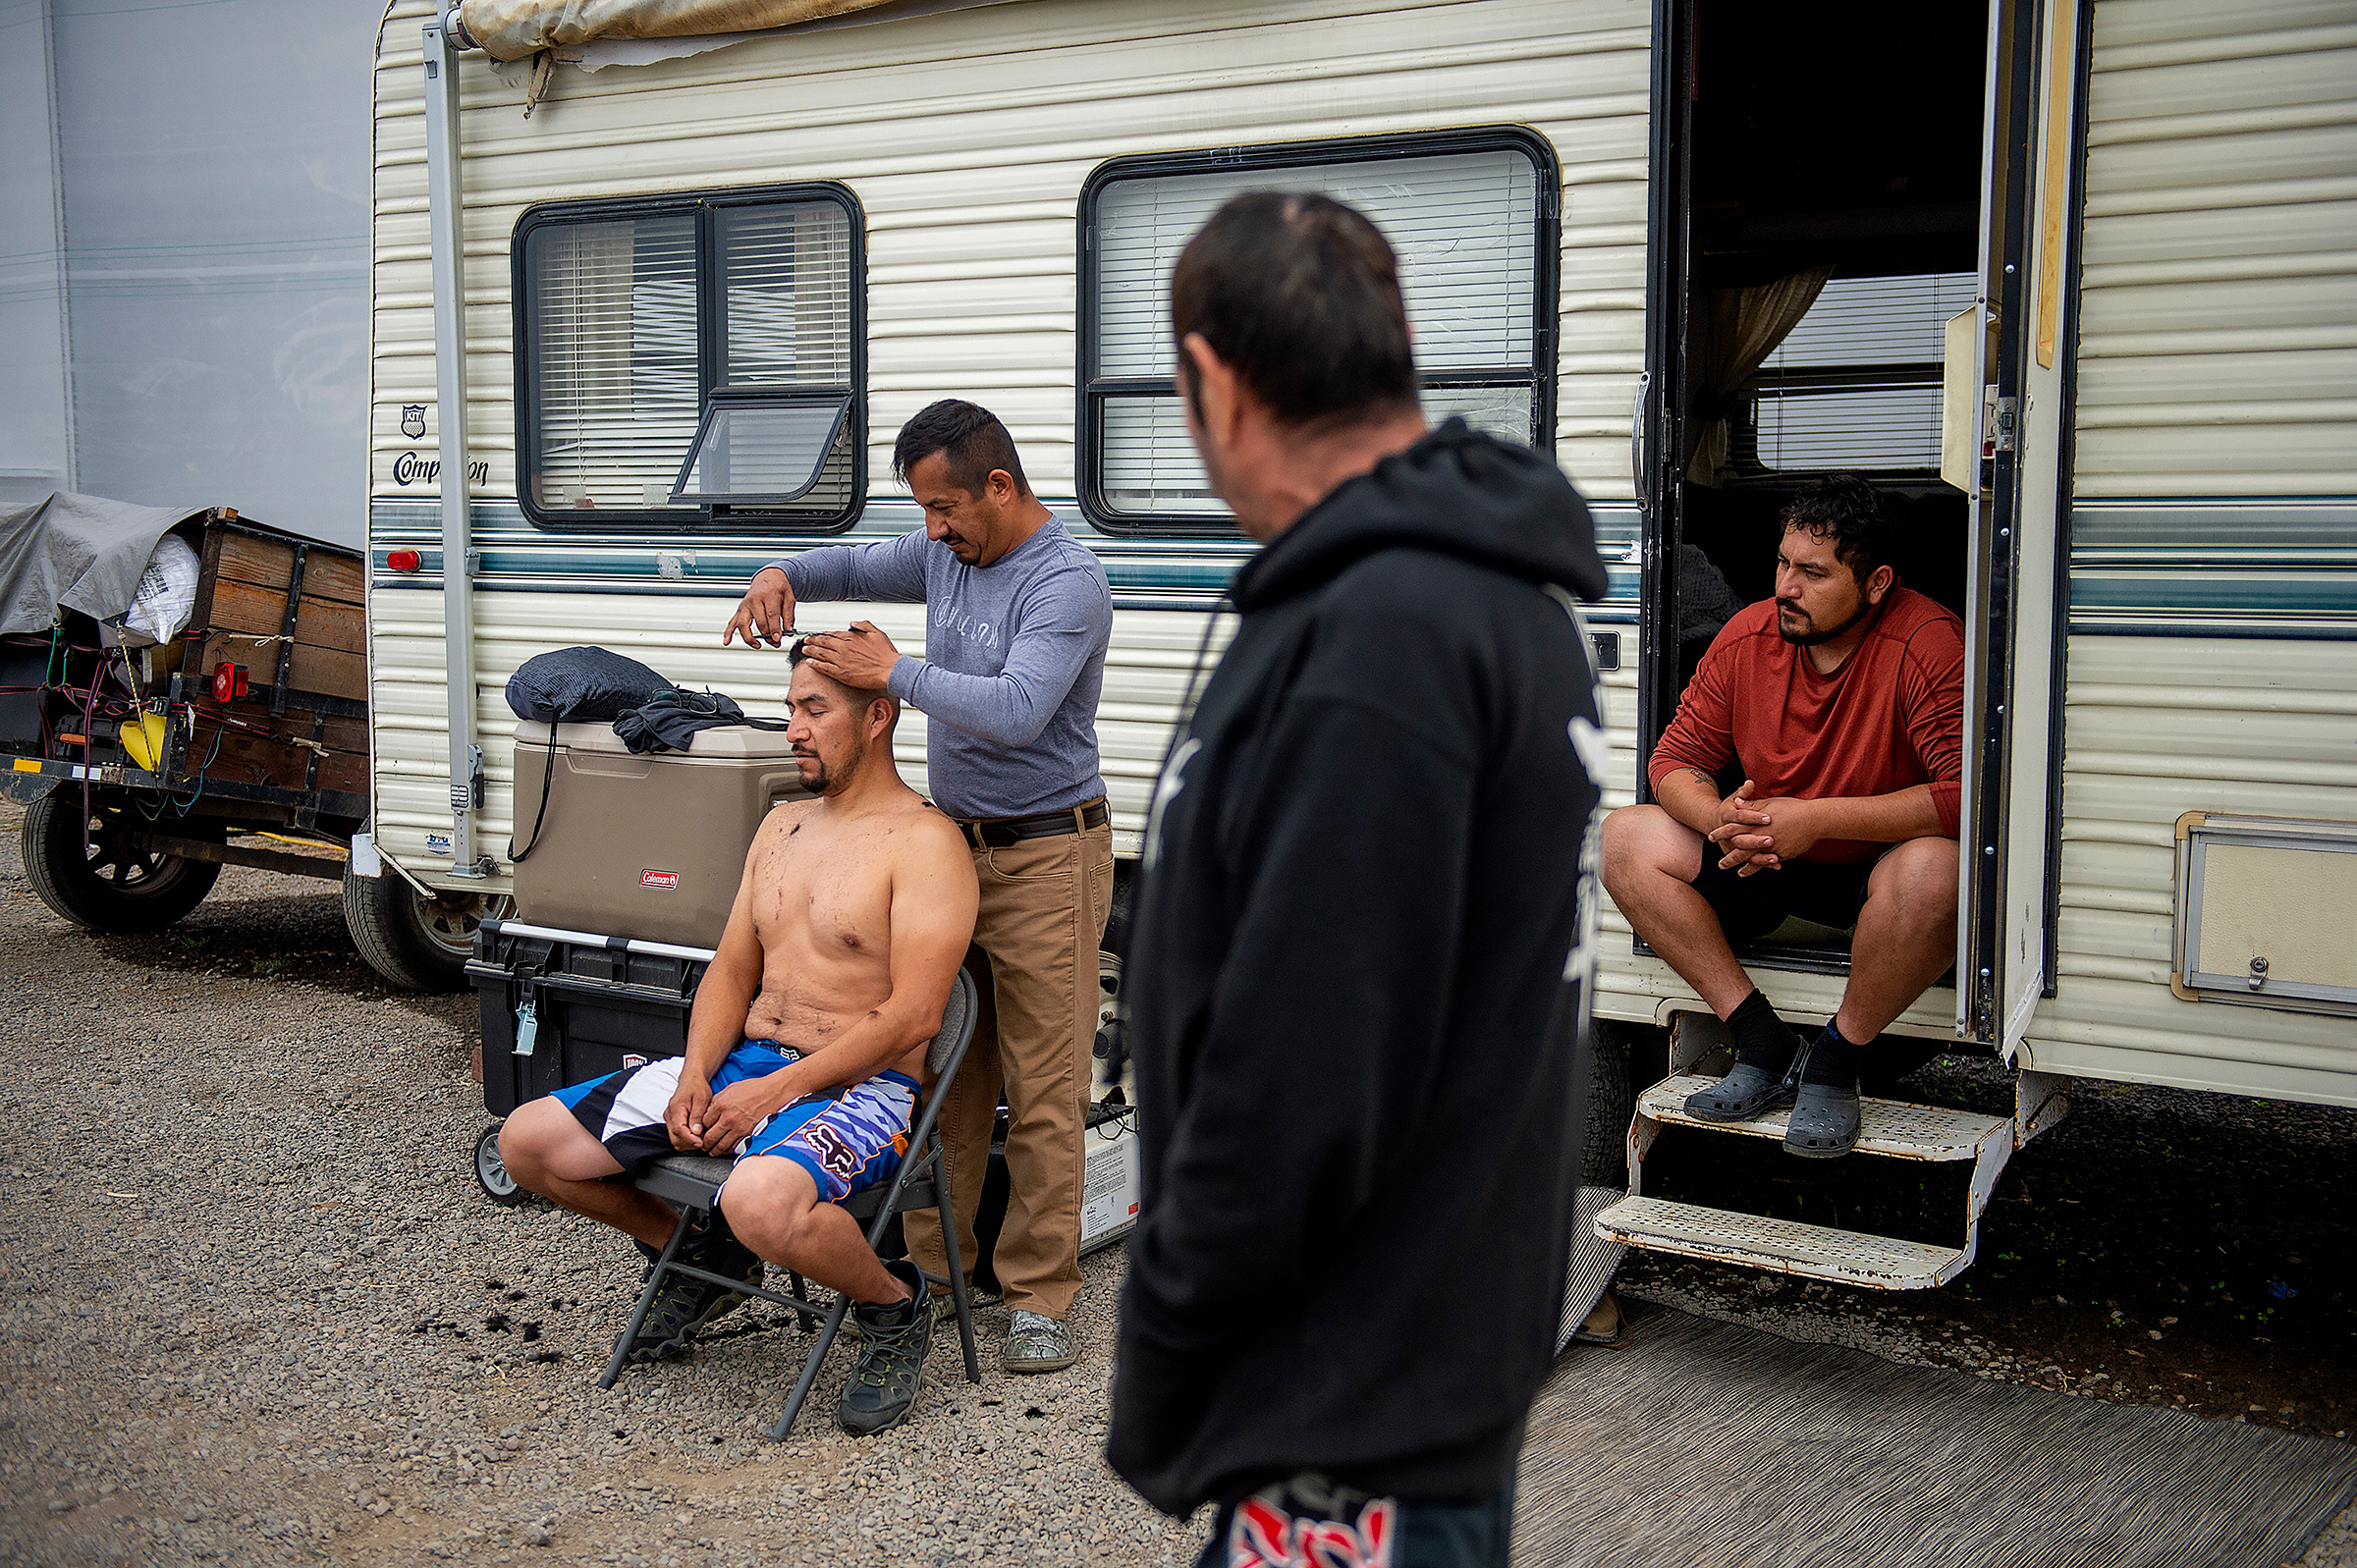 Julio Hernandez cuts the hair of his brother, Alvaro Hernandez, at a farm that opened space to people displaced by wildfires in Central Point, Ore., on Sept. 26, 2020. The Almeda Fire leveled some of the only affordable housing for the immigrants who work the fields, kitchens and construction sites of southern Oregon. (Amanda Lucier—The New York Times/Redux)